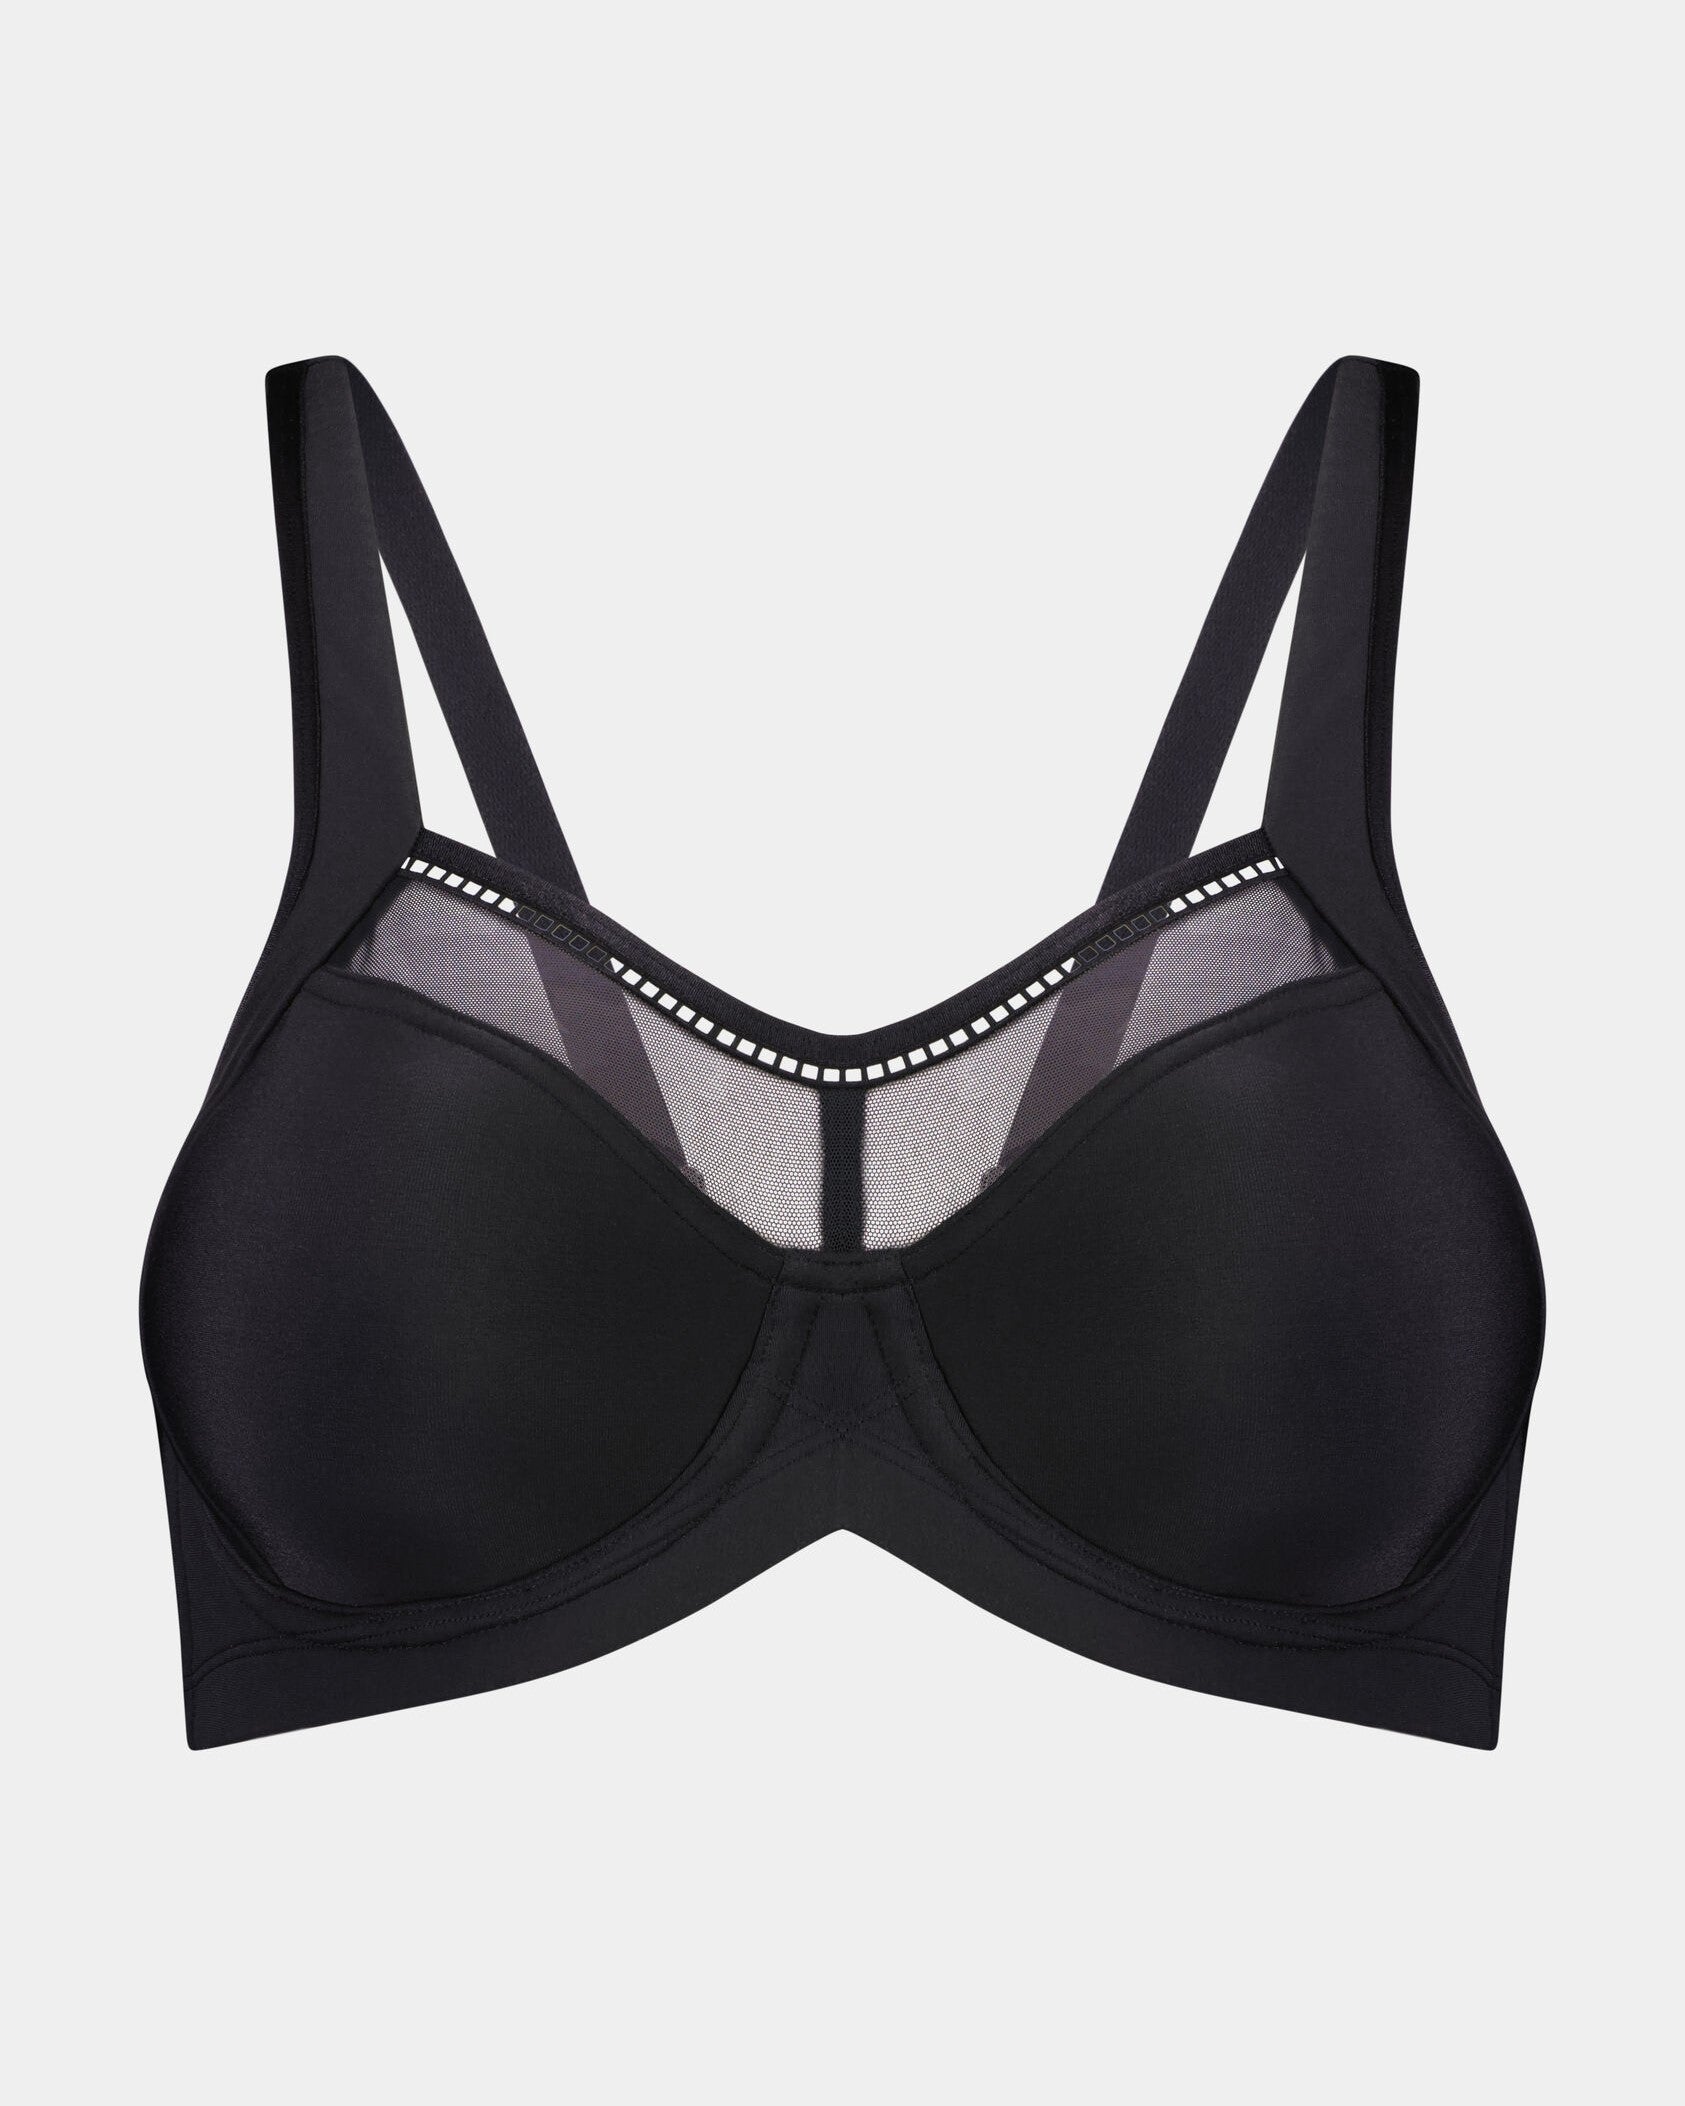 Bendon Extreme Out Sports Bra in Black/Silver